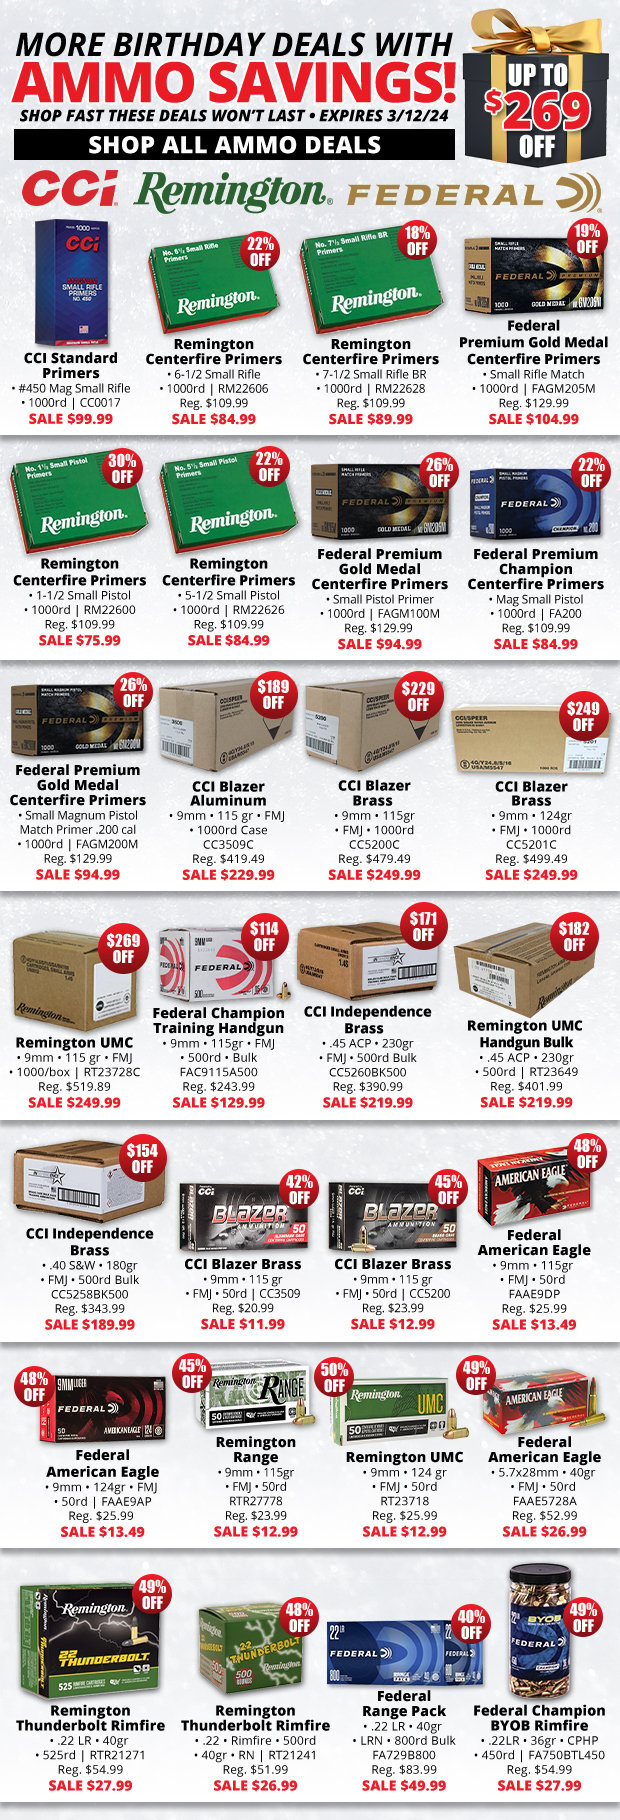 Up to $269 Off with More Natchez Ammo Birthday Deals!